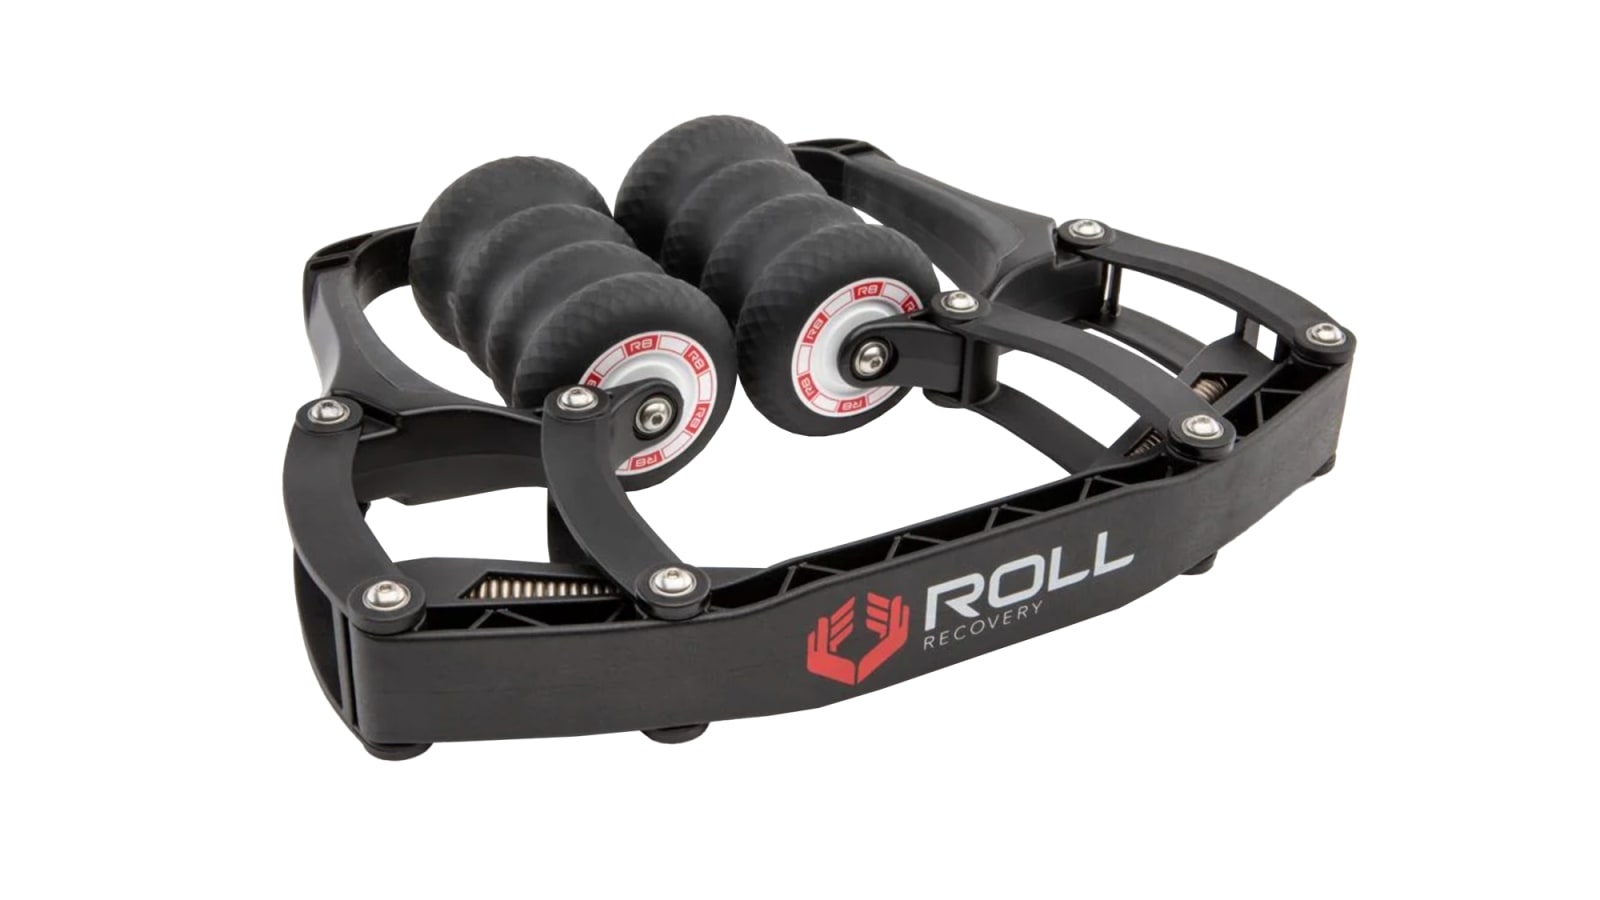 Roll Recovery R8 Plus Carbon Black